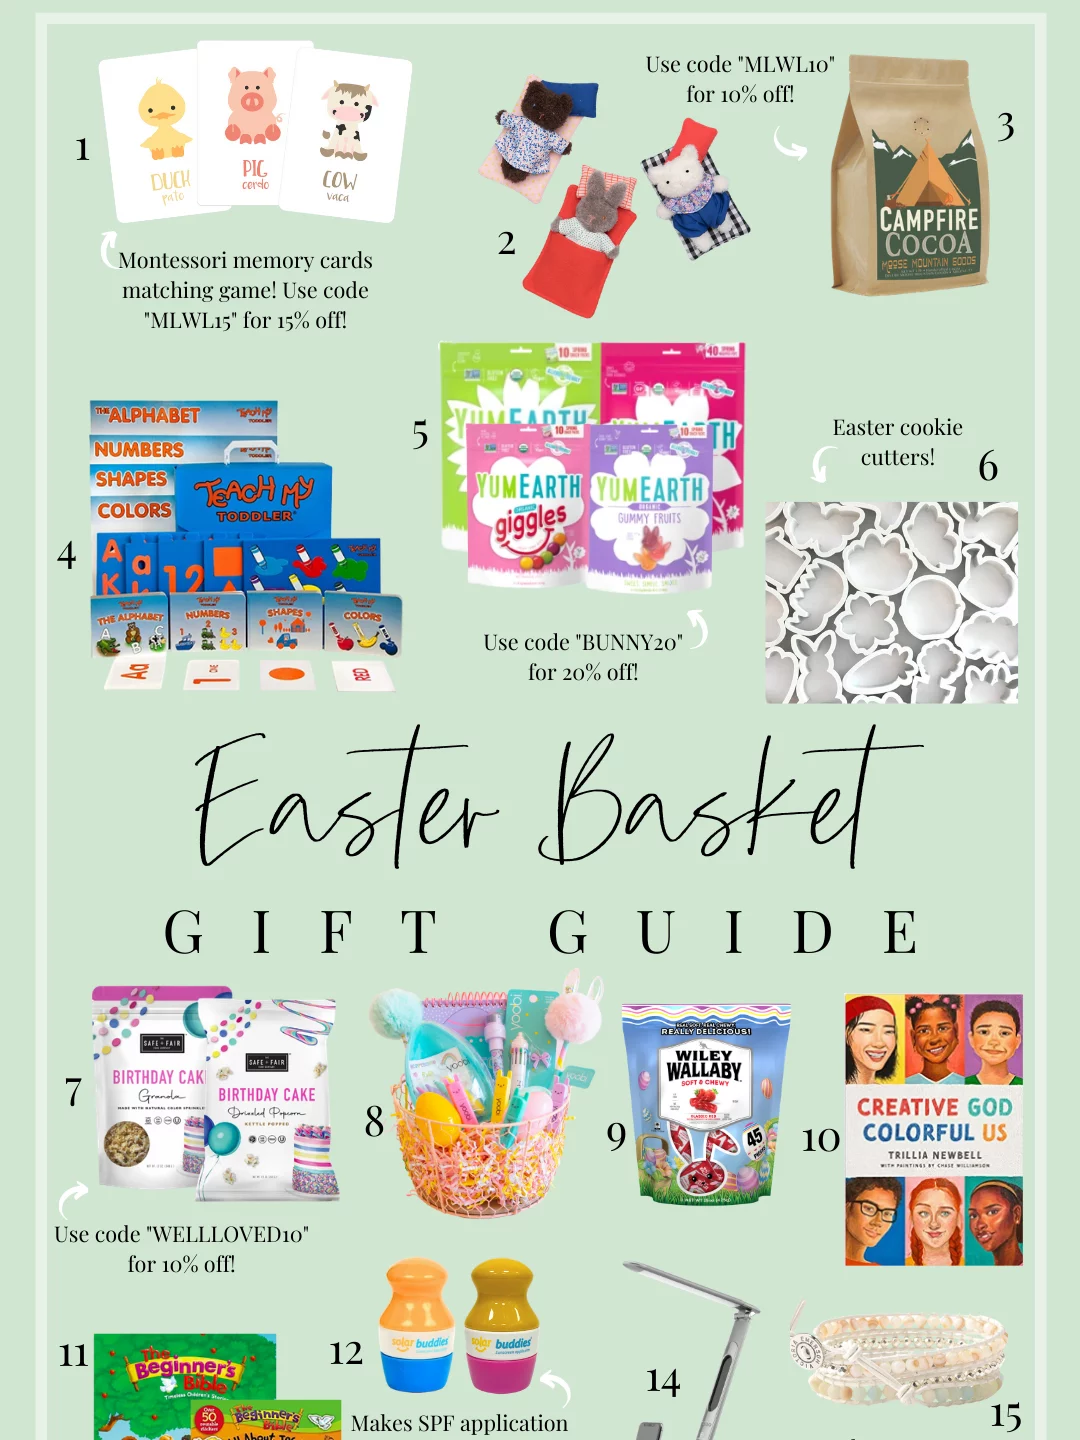 Mom + lifestyle blogger, My Life Well Loved, shares her Easter Basket ideas for boys and girls! Click NOW to shop them all!